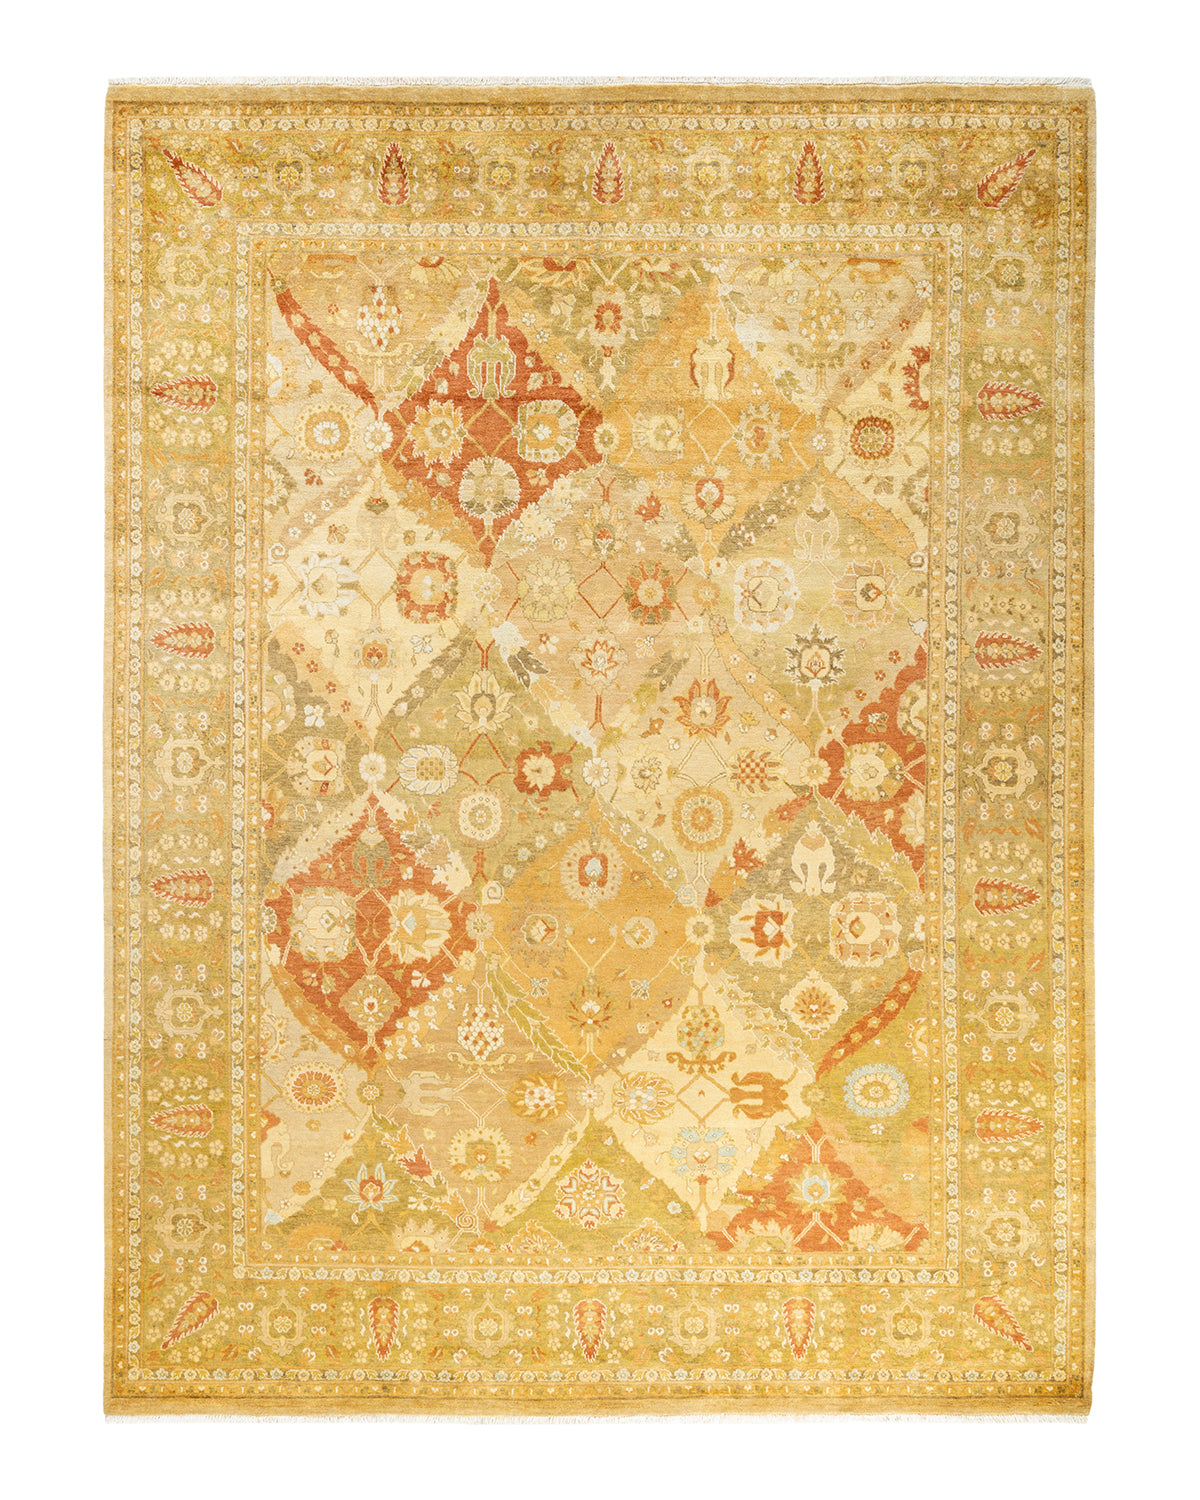 Eclectic, One-of-a-Kind Hand-Knotted Area Rug  - Yellow, 8' 0" x 10' 7"